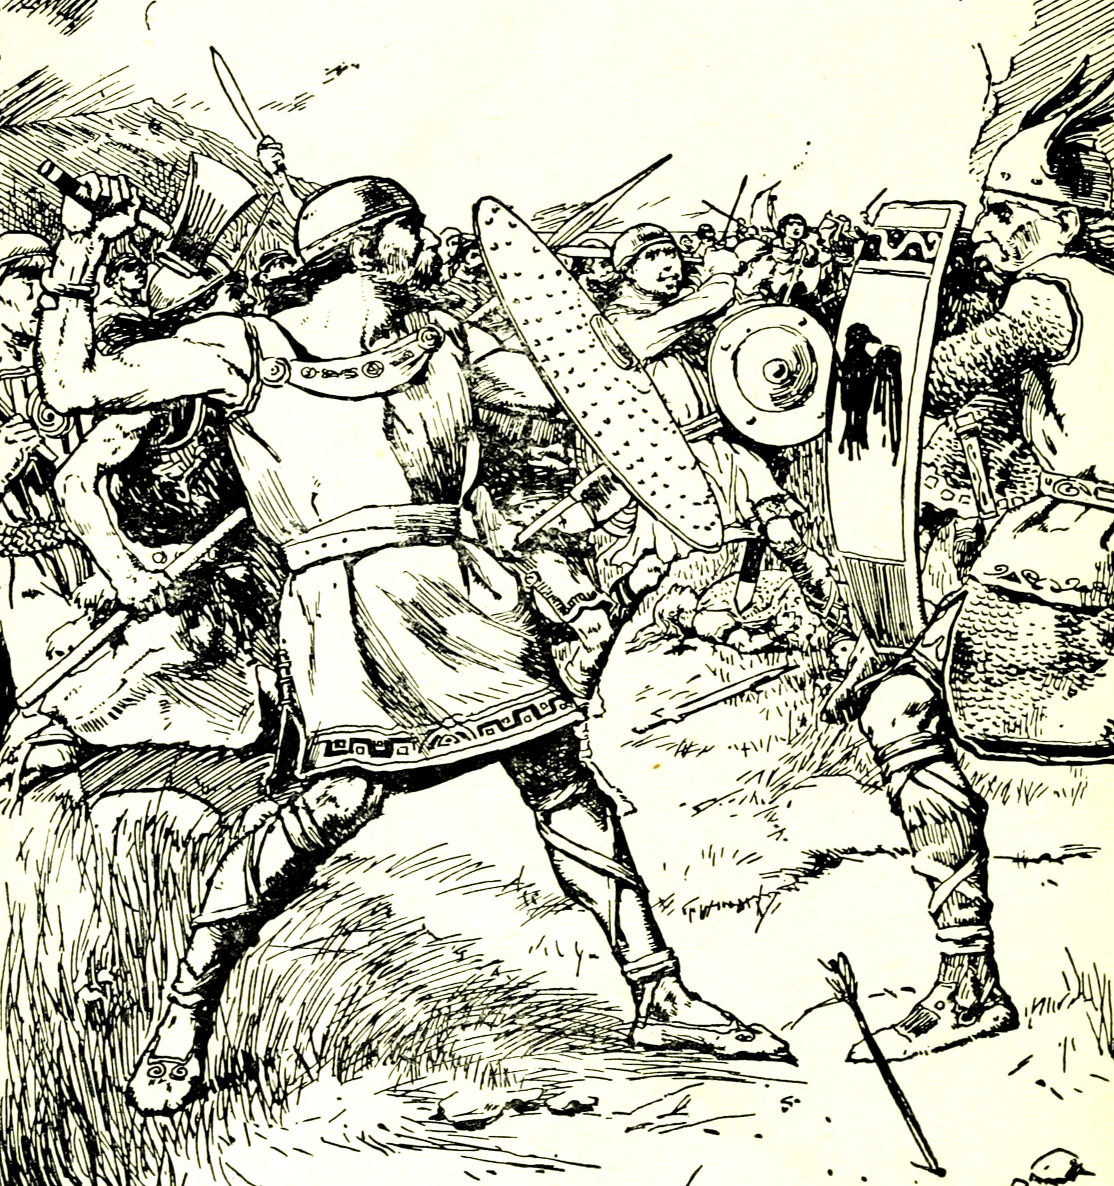 [Image: Drawing of Gaelic forces clashing with Vikings in a pitched battle]